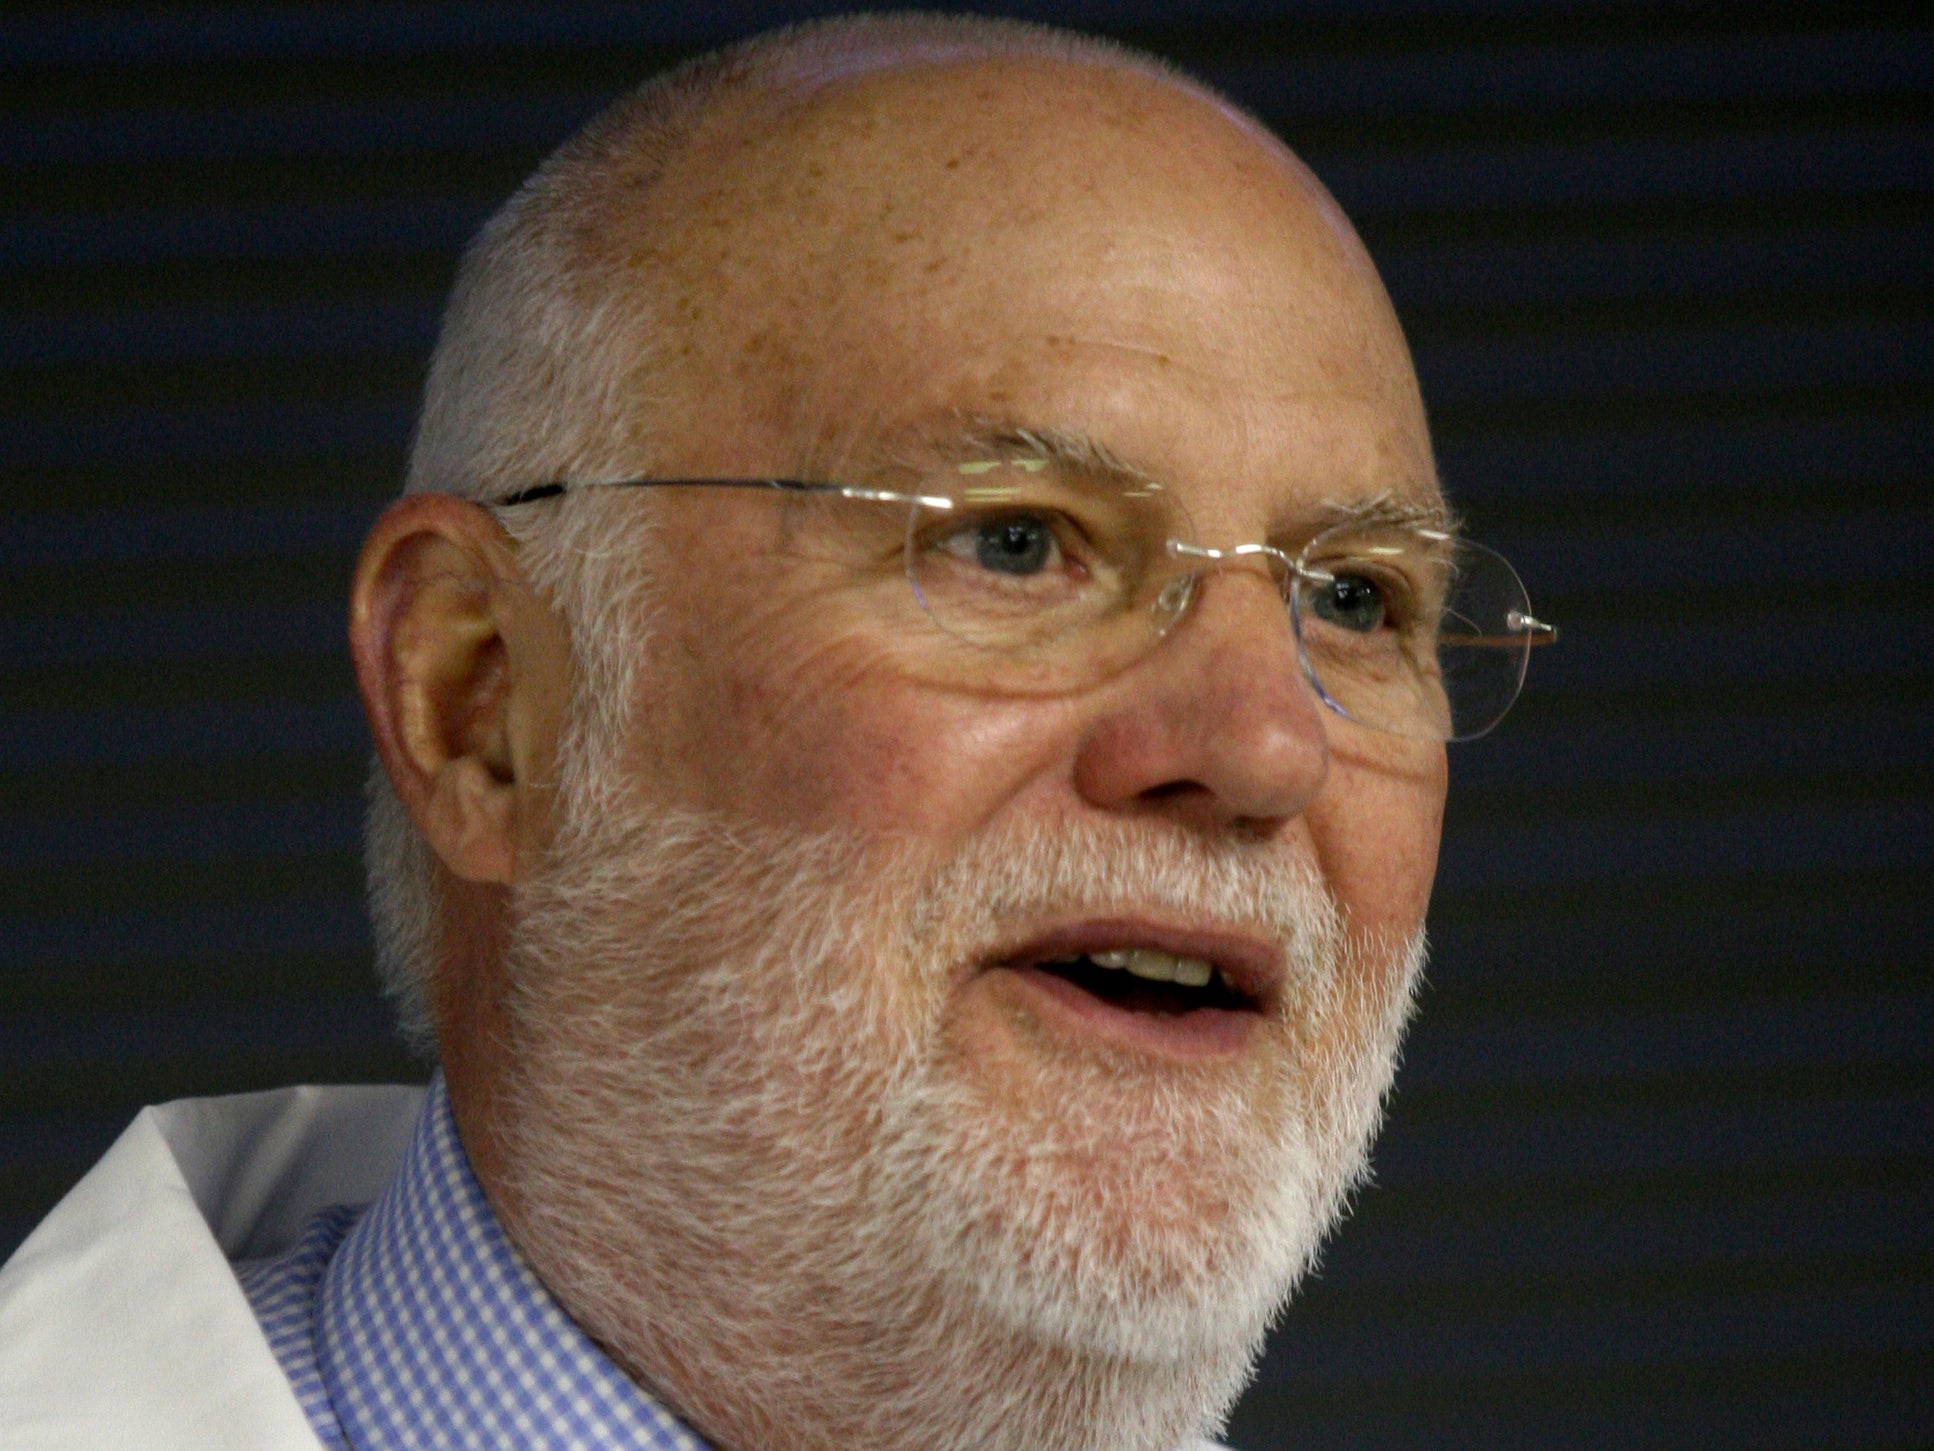 Dr Donald Cline, a reproductive endocrinologist and fertility specialist, speaks at a new conference in Indianapolis in 2007